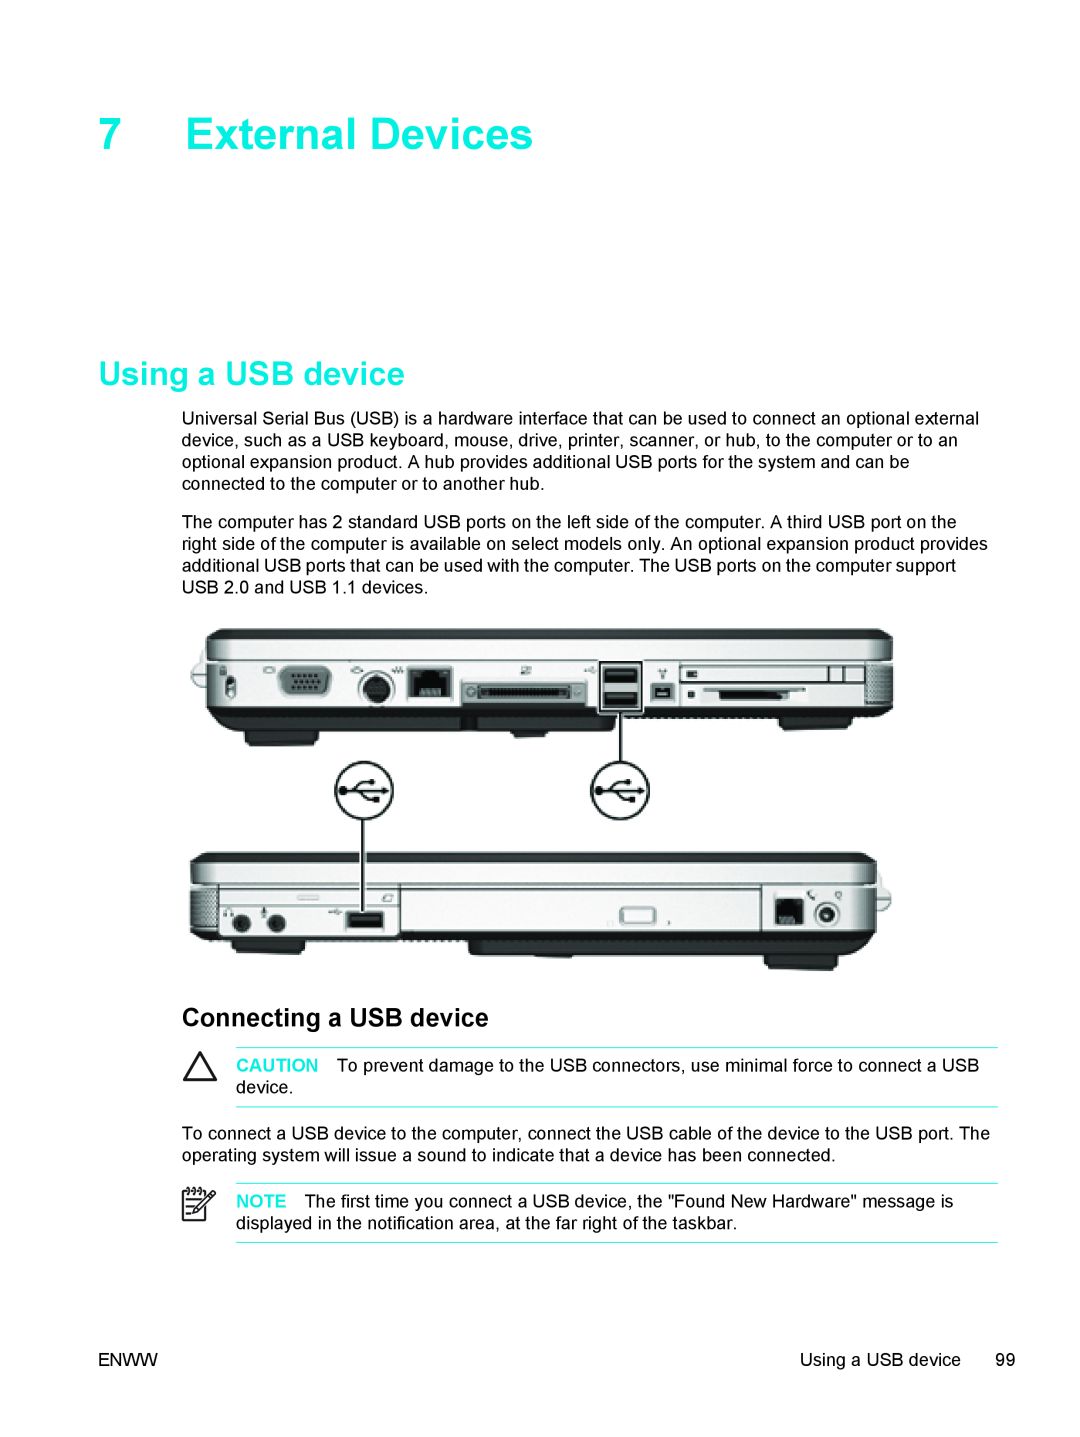 HP V5204TU, V5224TU, V5221TU, V5221EA, V5219TU, V5218TU, V5215LA External Devices, Using a USB device, Connecting a USB device 